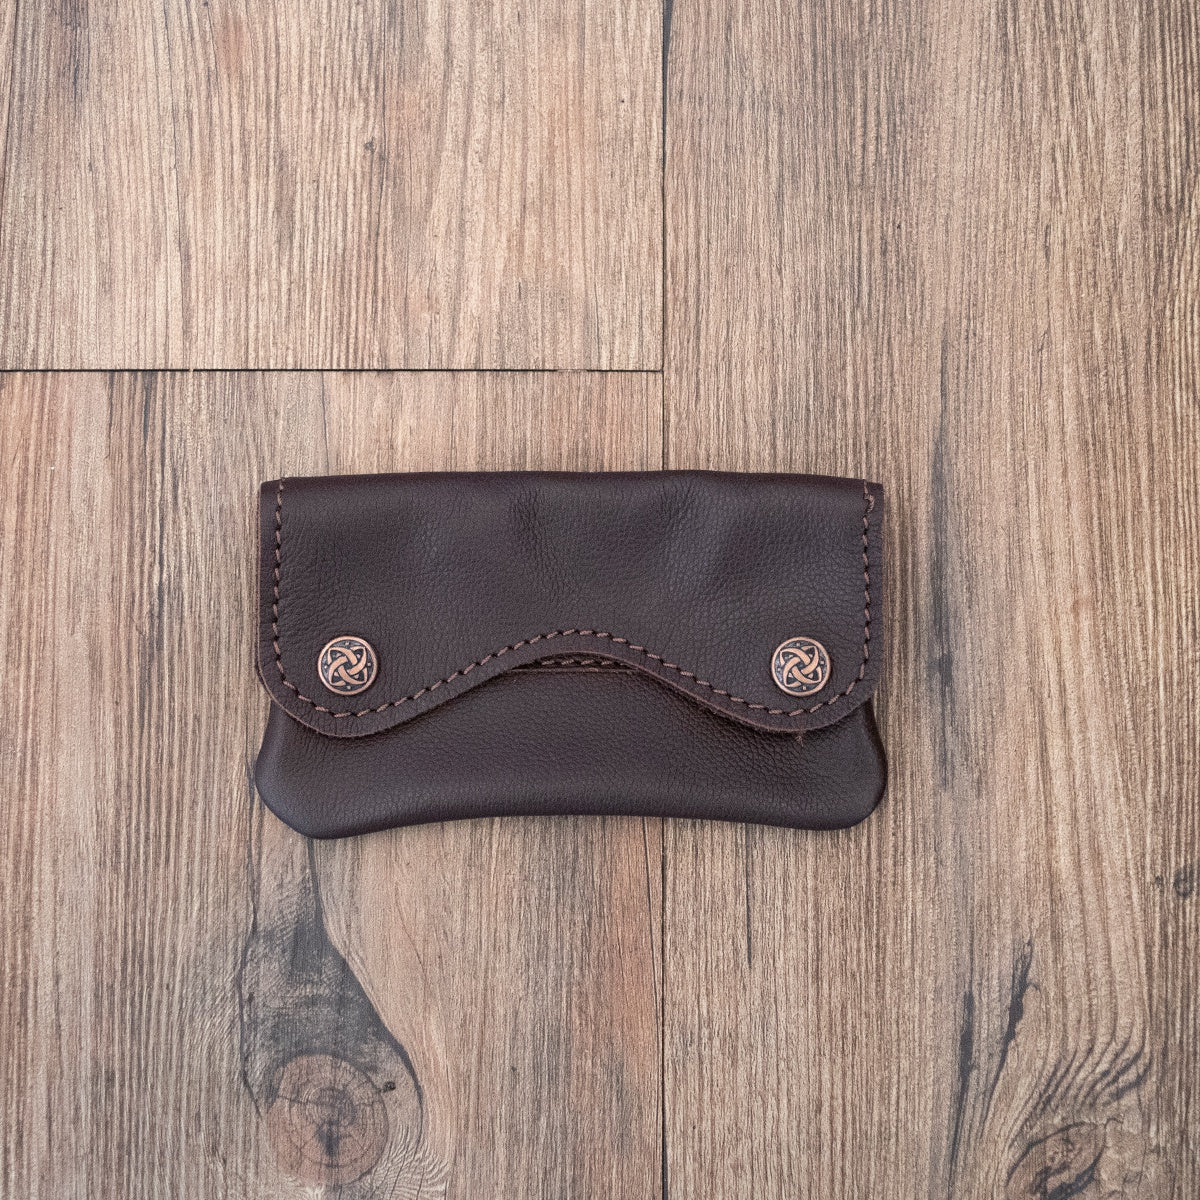 Leather tobacco pouch with 2 stud clips.